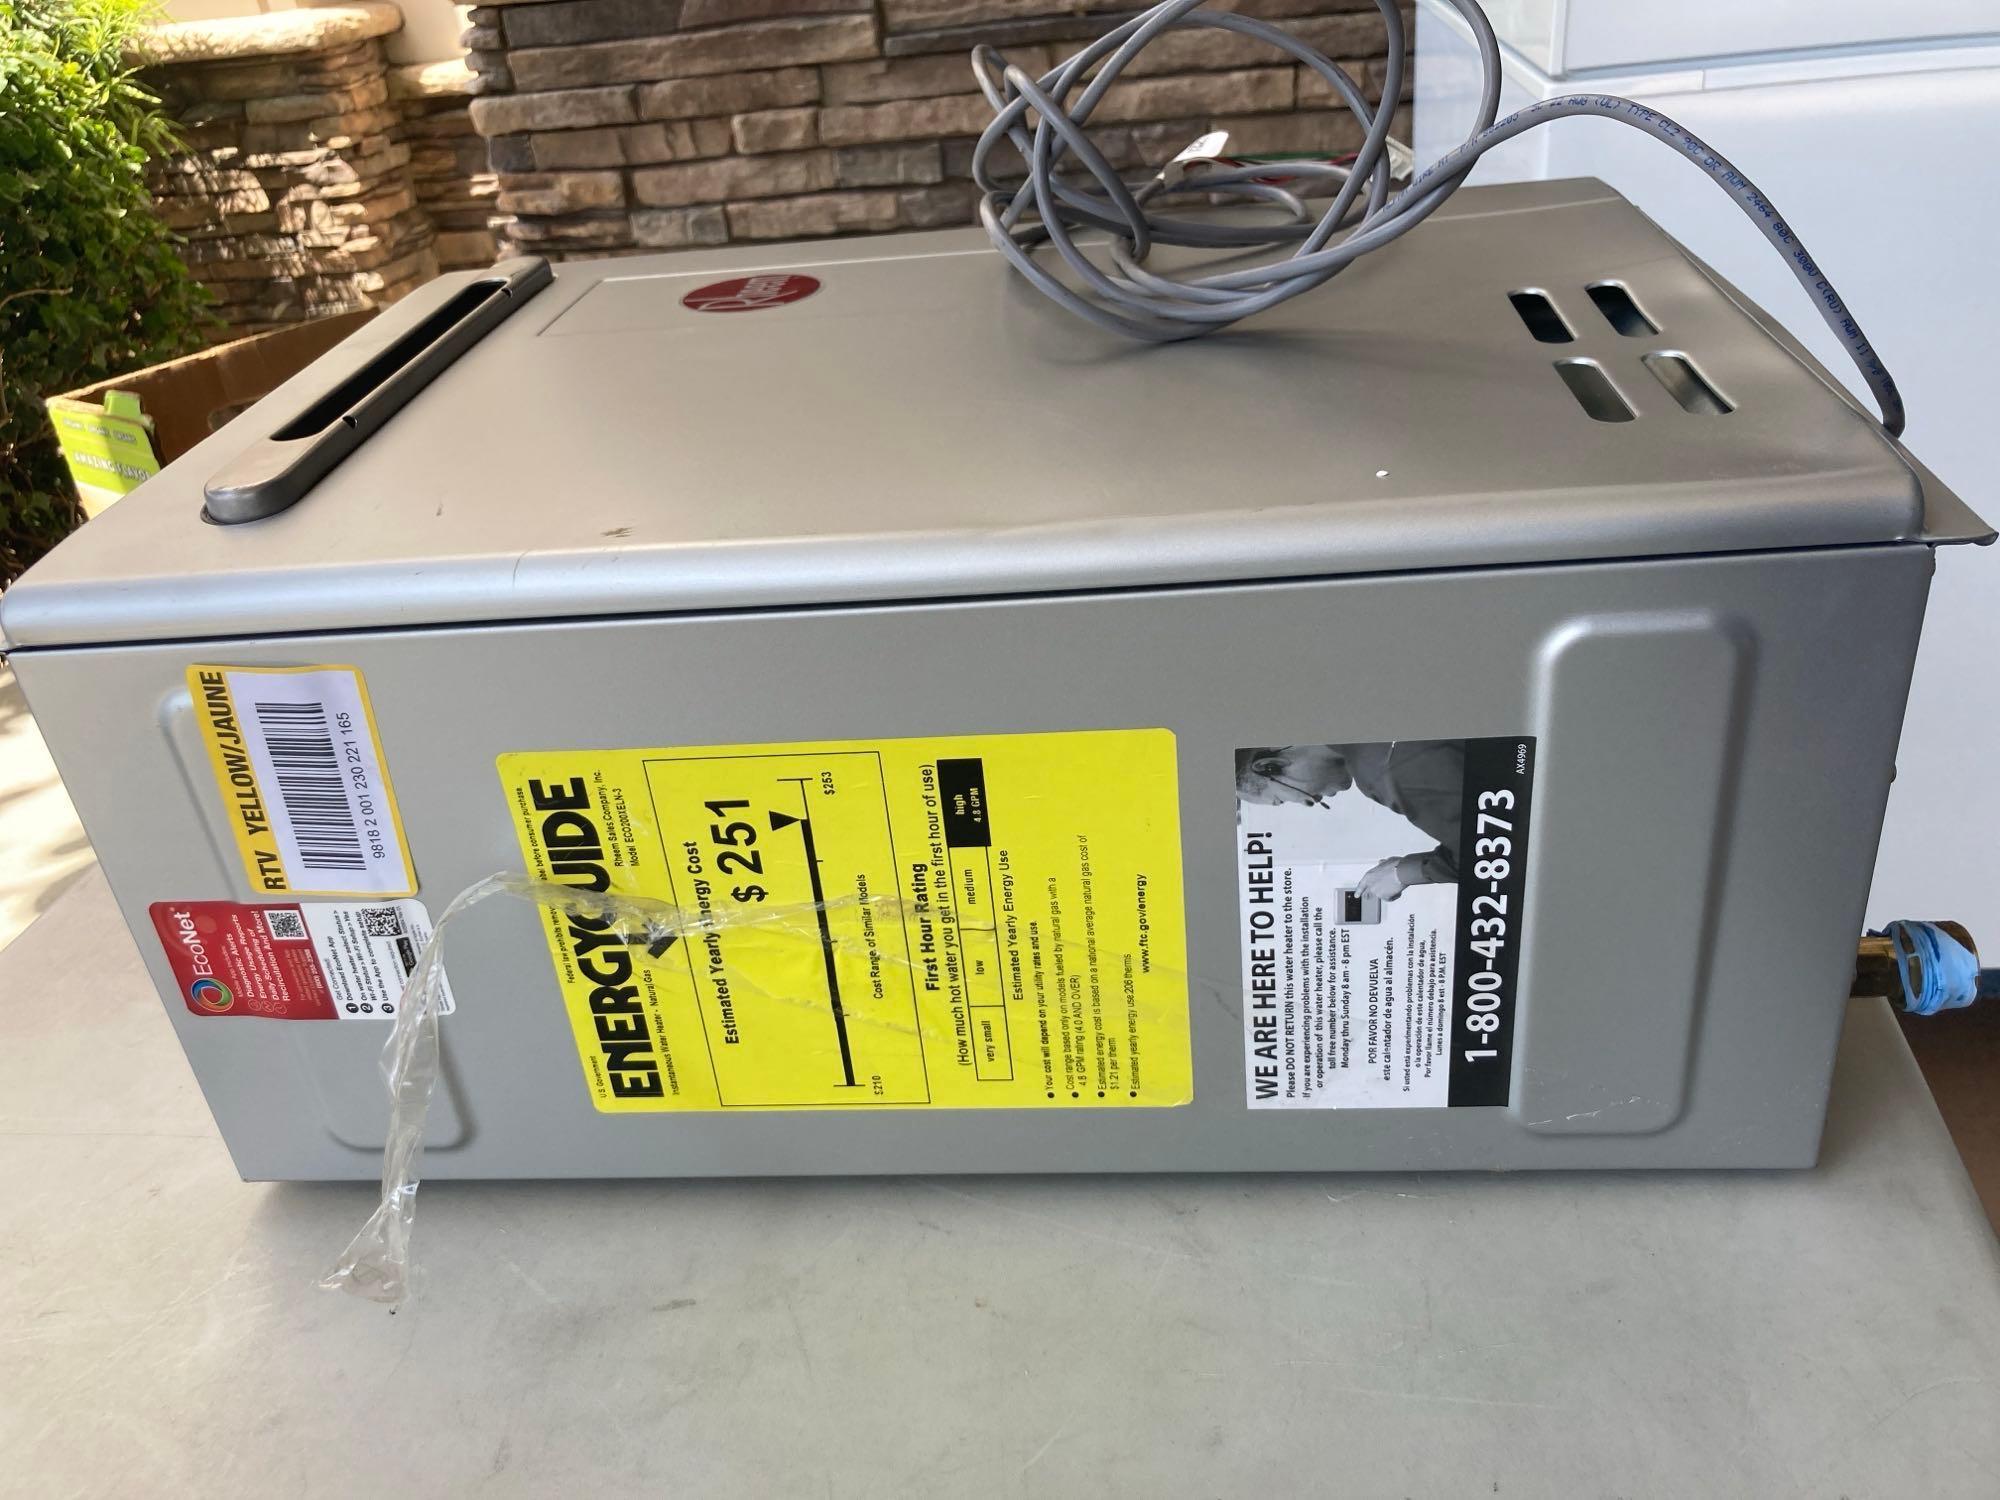 Rheem Performance Plus 9.5 GPM Natural Gas Outdoor Smart Tankless Water Heater*PREVIOUSLY